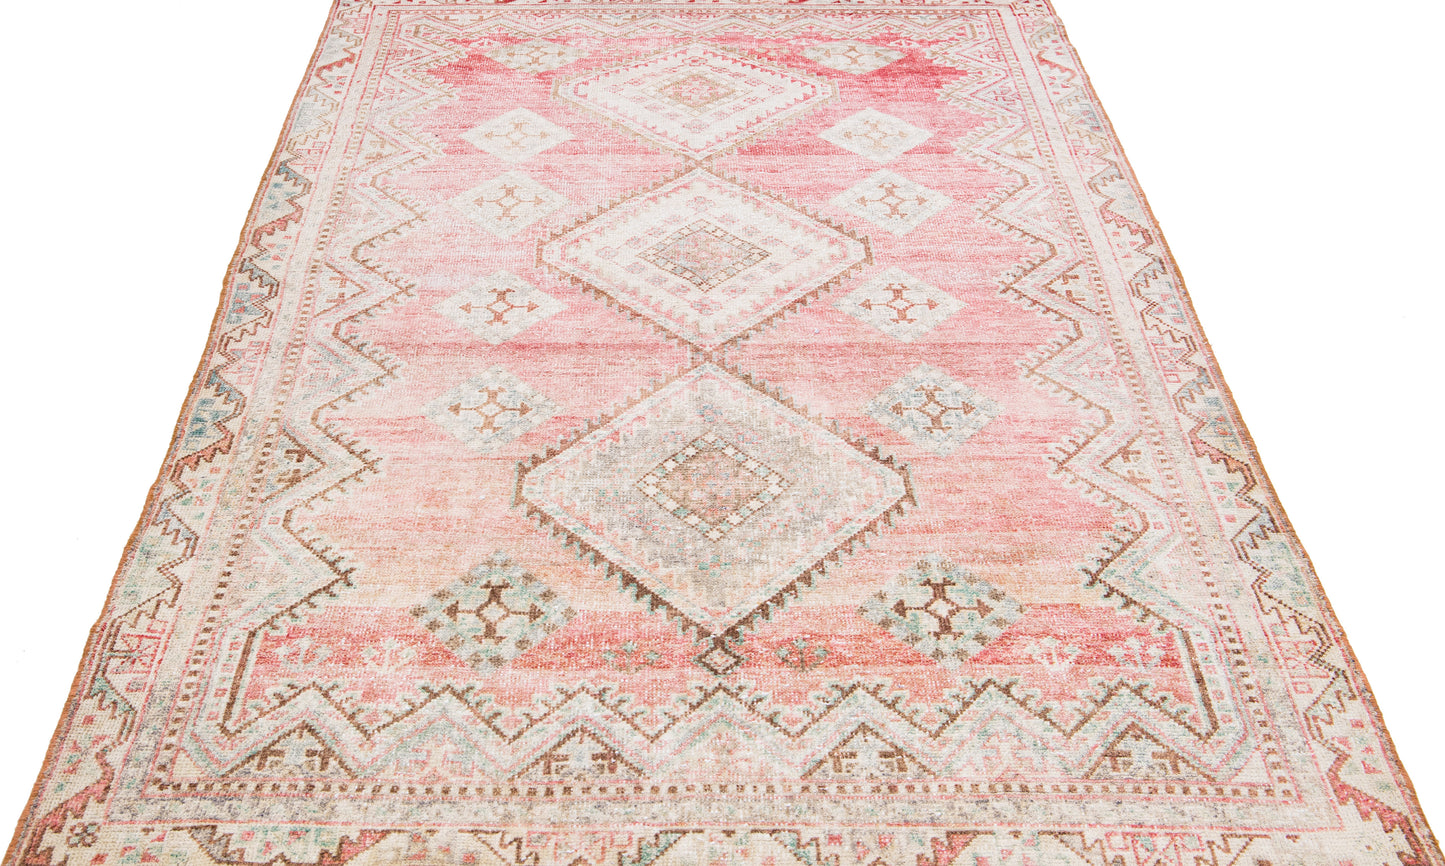 Gorgeous Faded Red Mahal Wool Rug - 5' x 8'3"